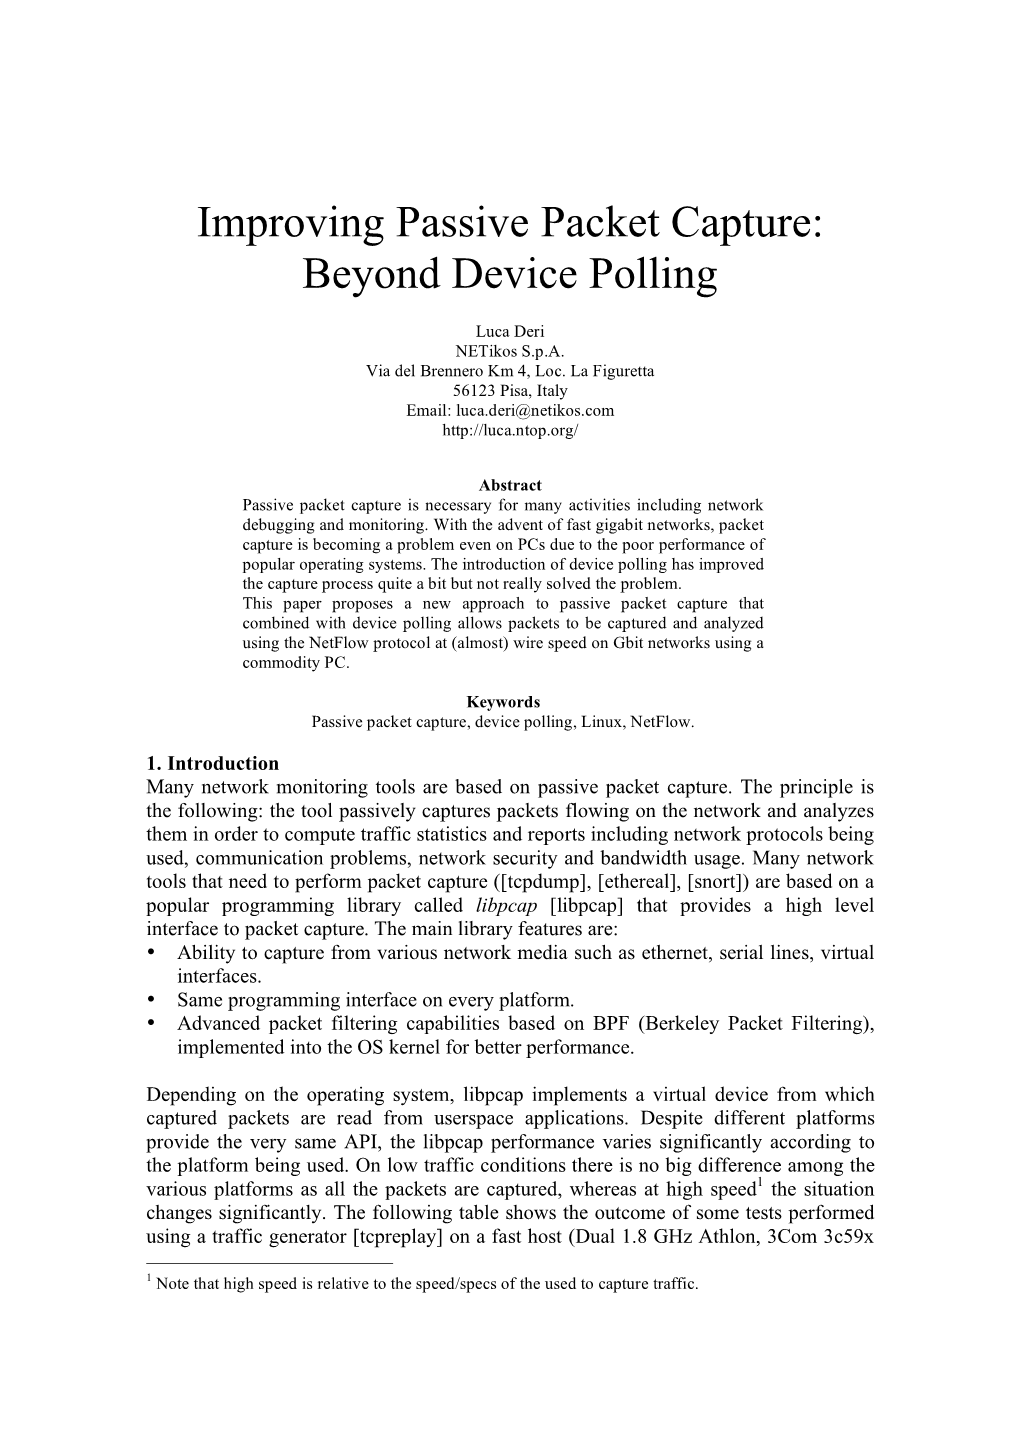 Improving Passive Packet Capture: Beyond Device Polling